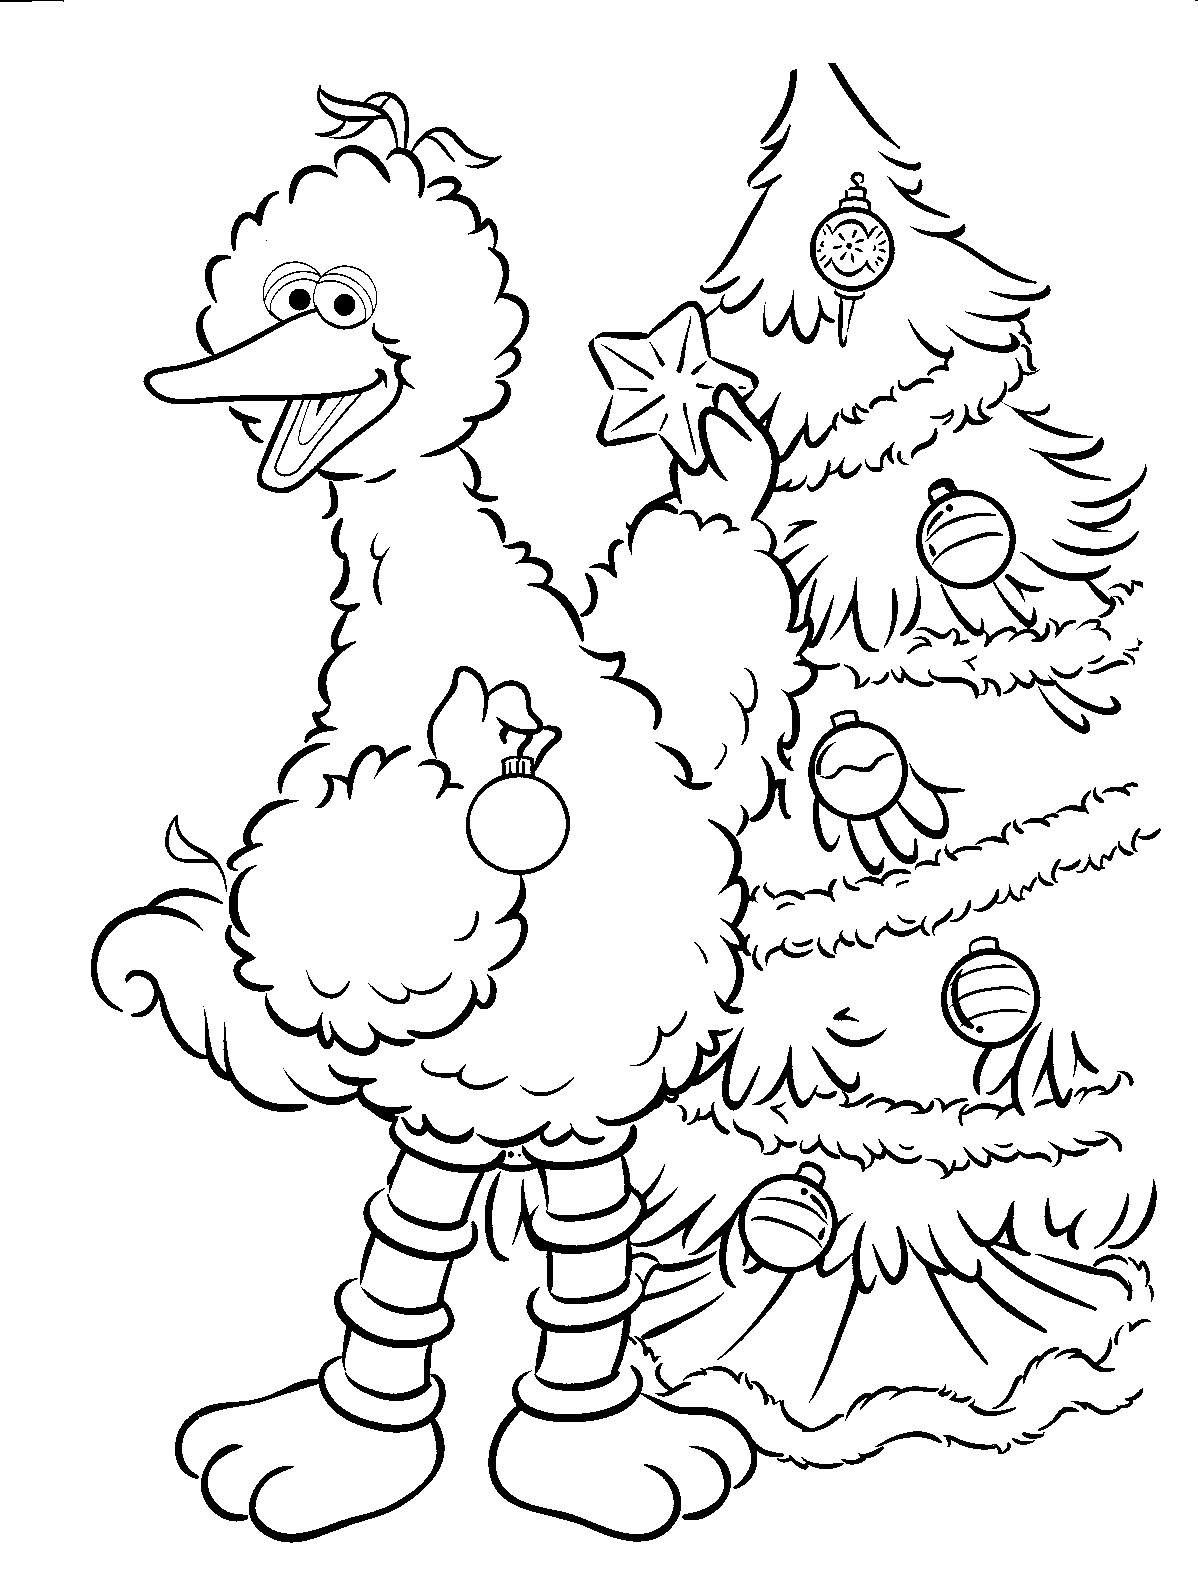 Sesame Street Coloring Pages To Print at GetColorings.com | Free